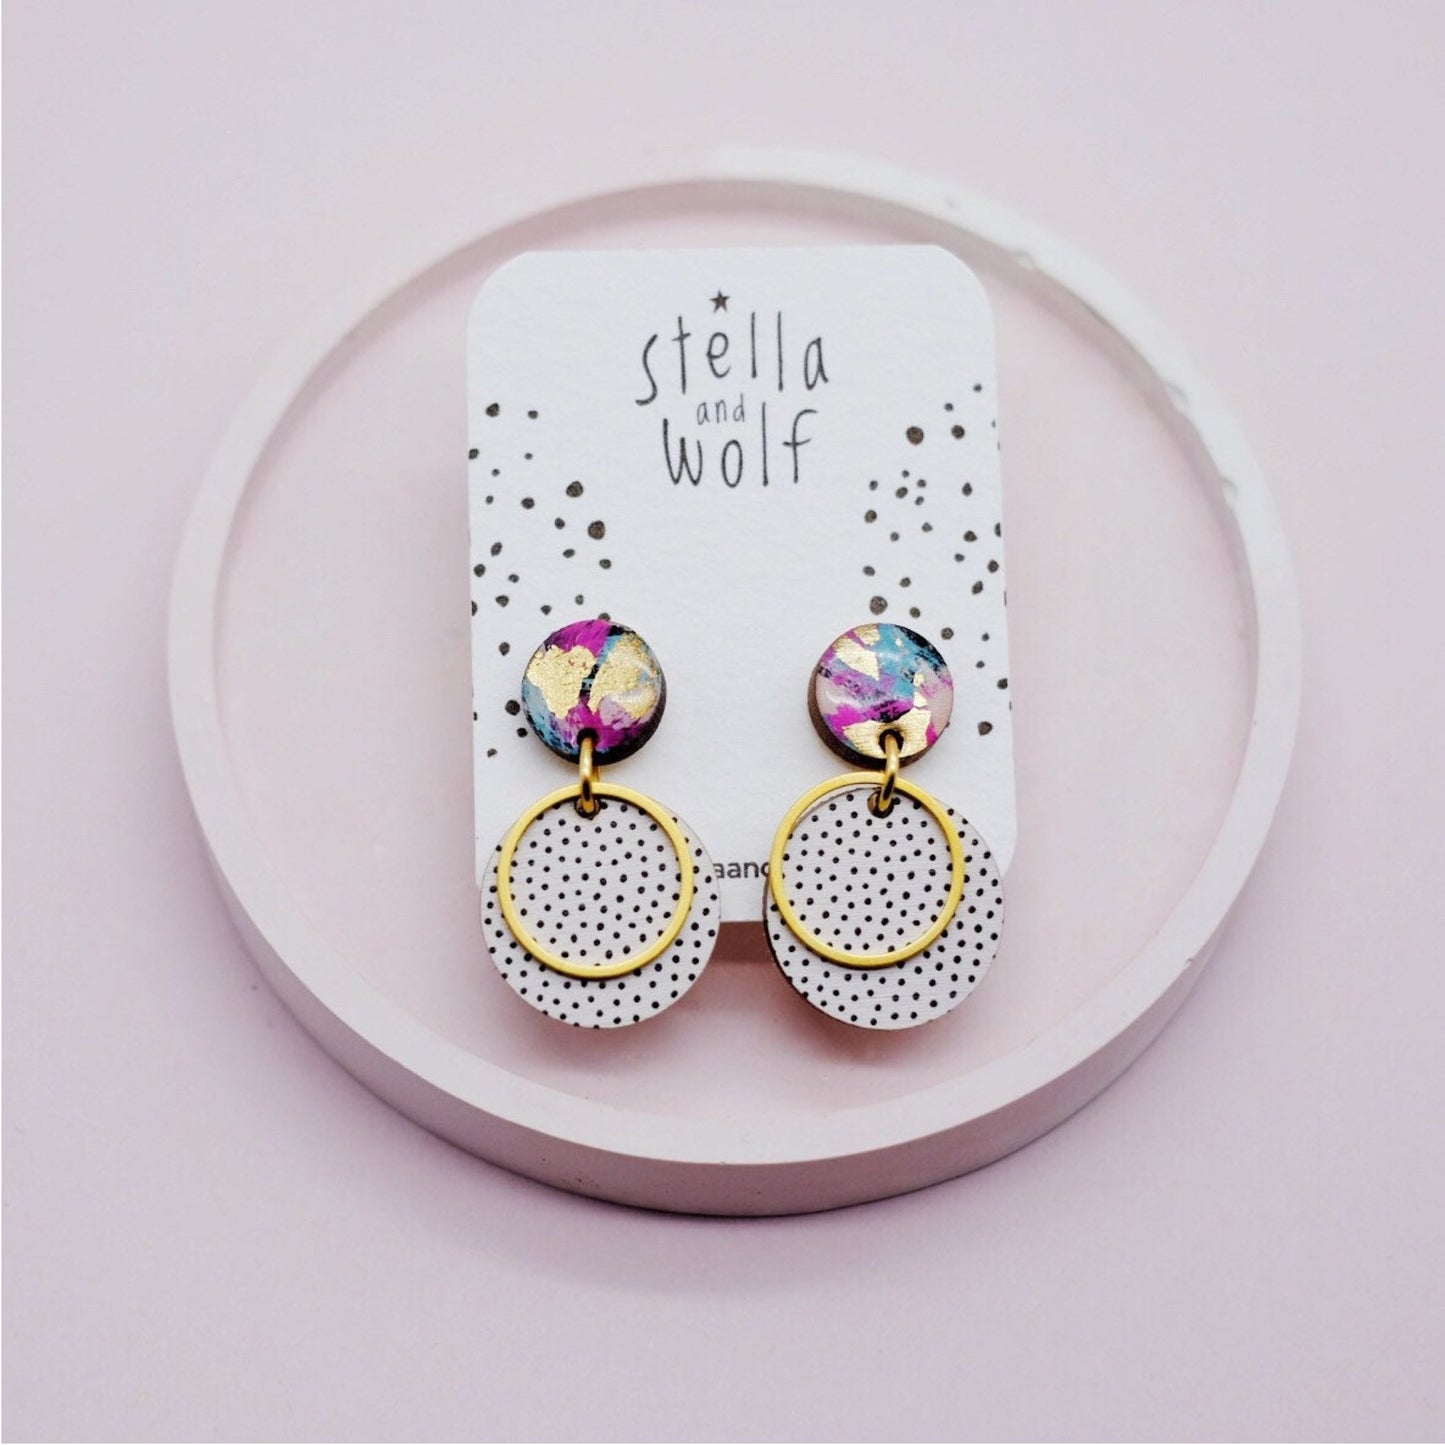 White and Black Polka Dot Drop Earrings With Galaxy Print - The Little Jewellery Company